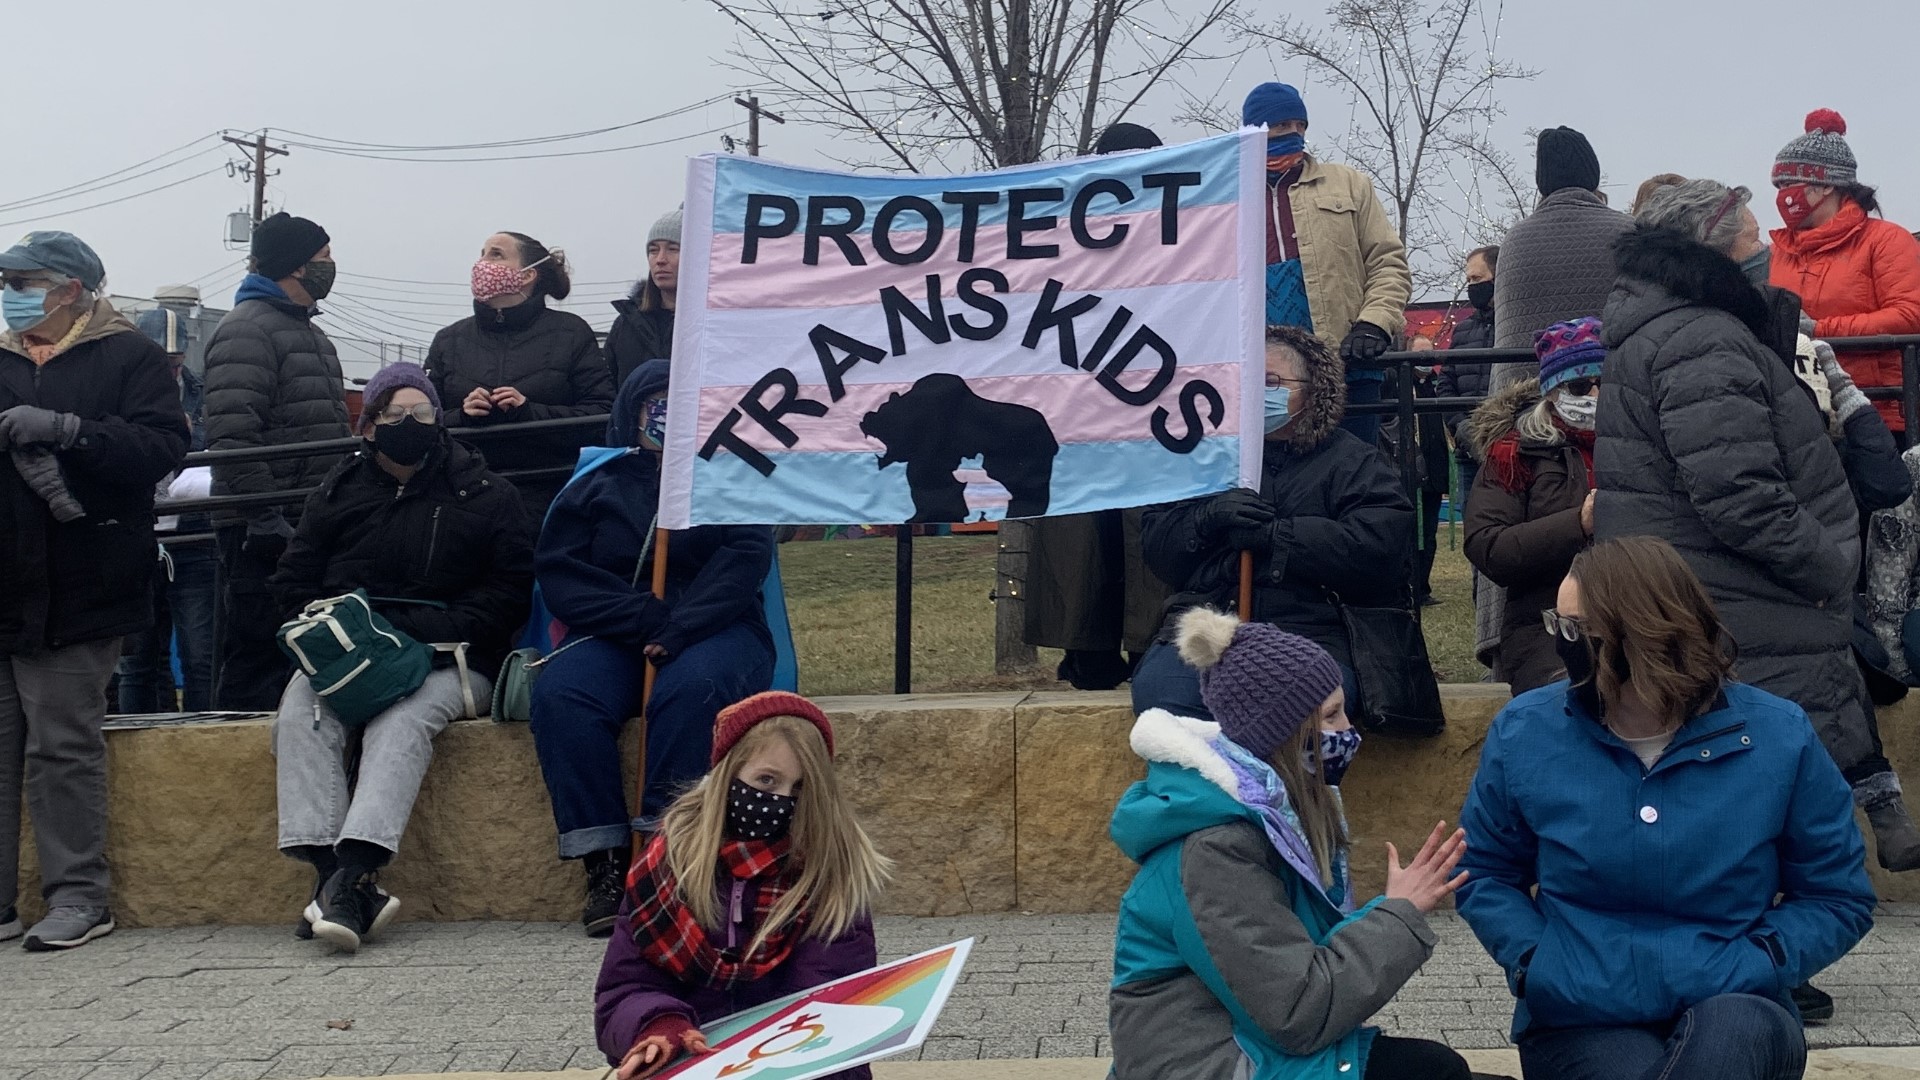 Saturday afternoon, several local organizations held a rally to show their support for transgender, non-binary, and LGBTQ+ kids.